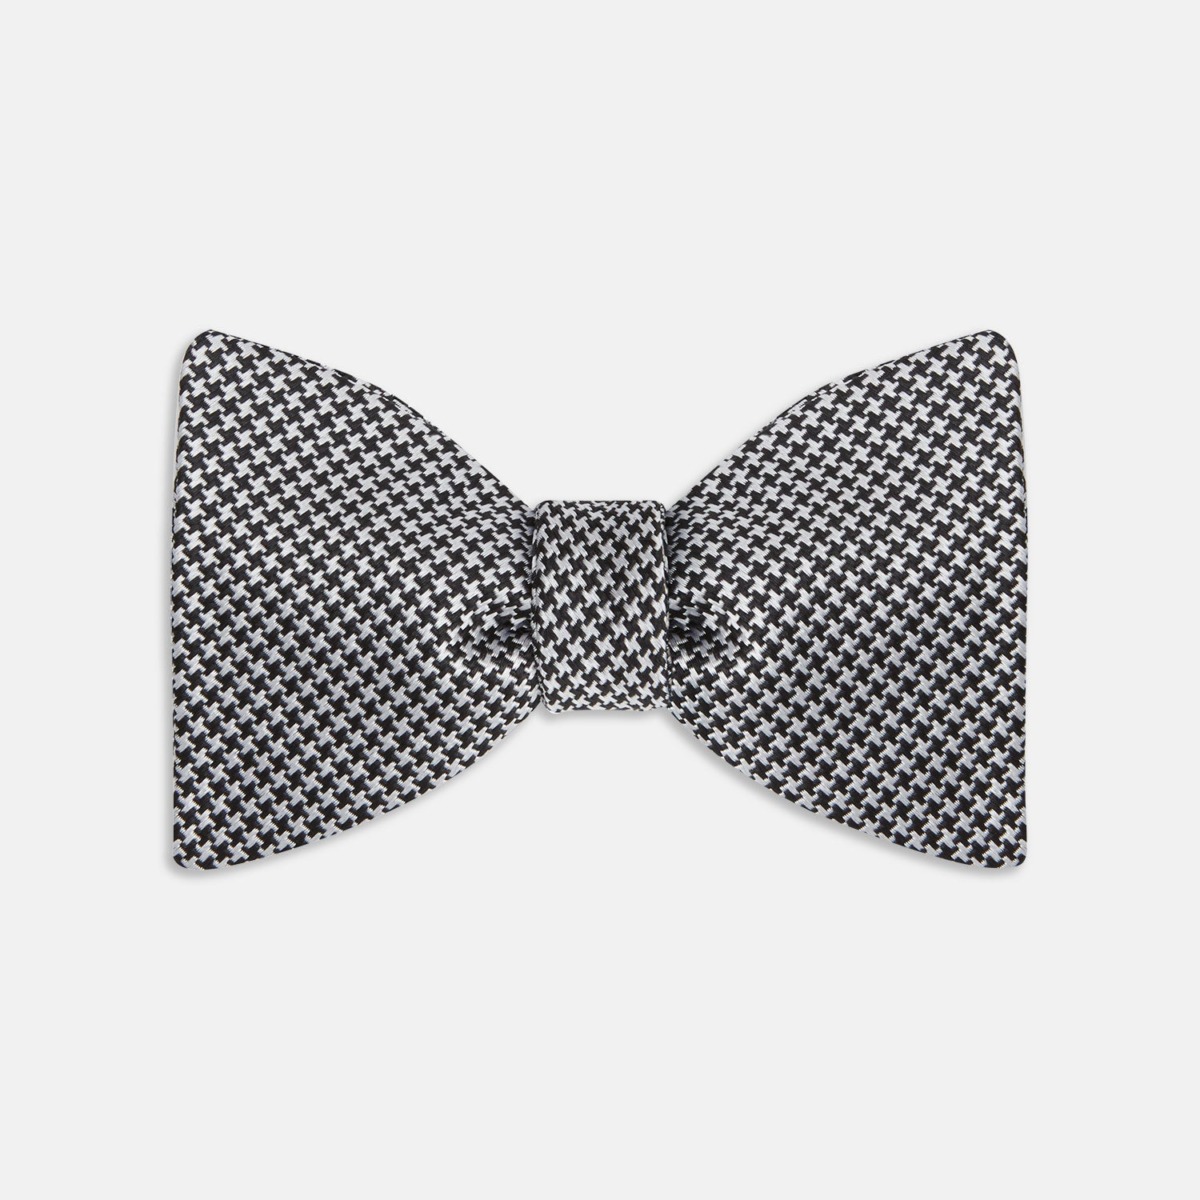 Turnbull And Asser - White Bow Tie Turnbull & Asser Gents GOOFASH